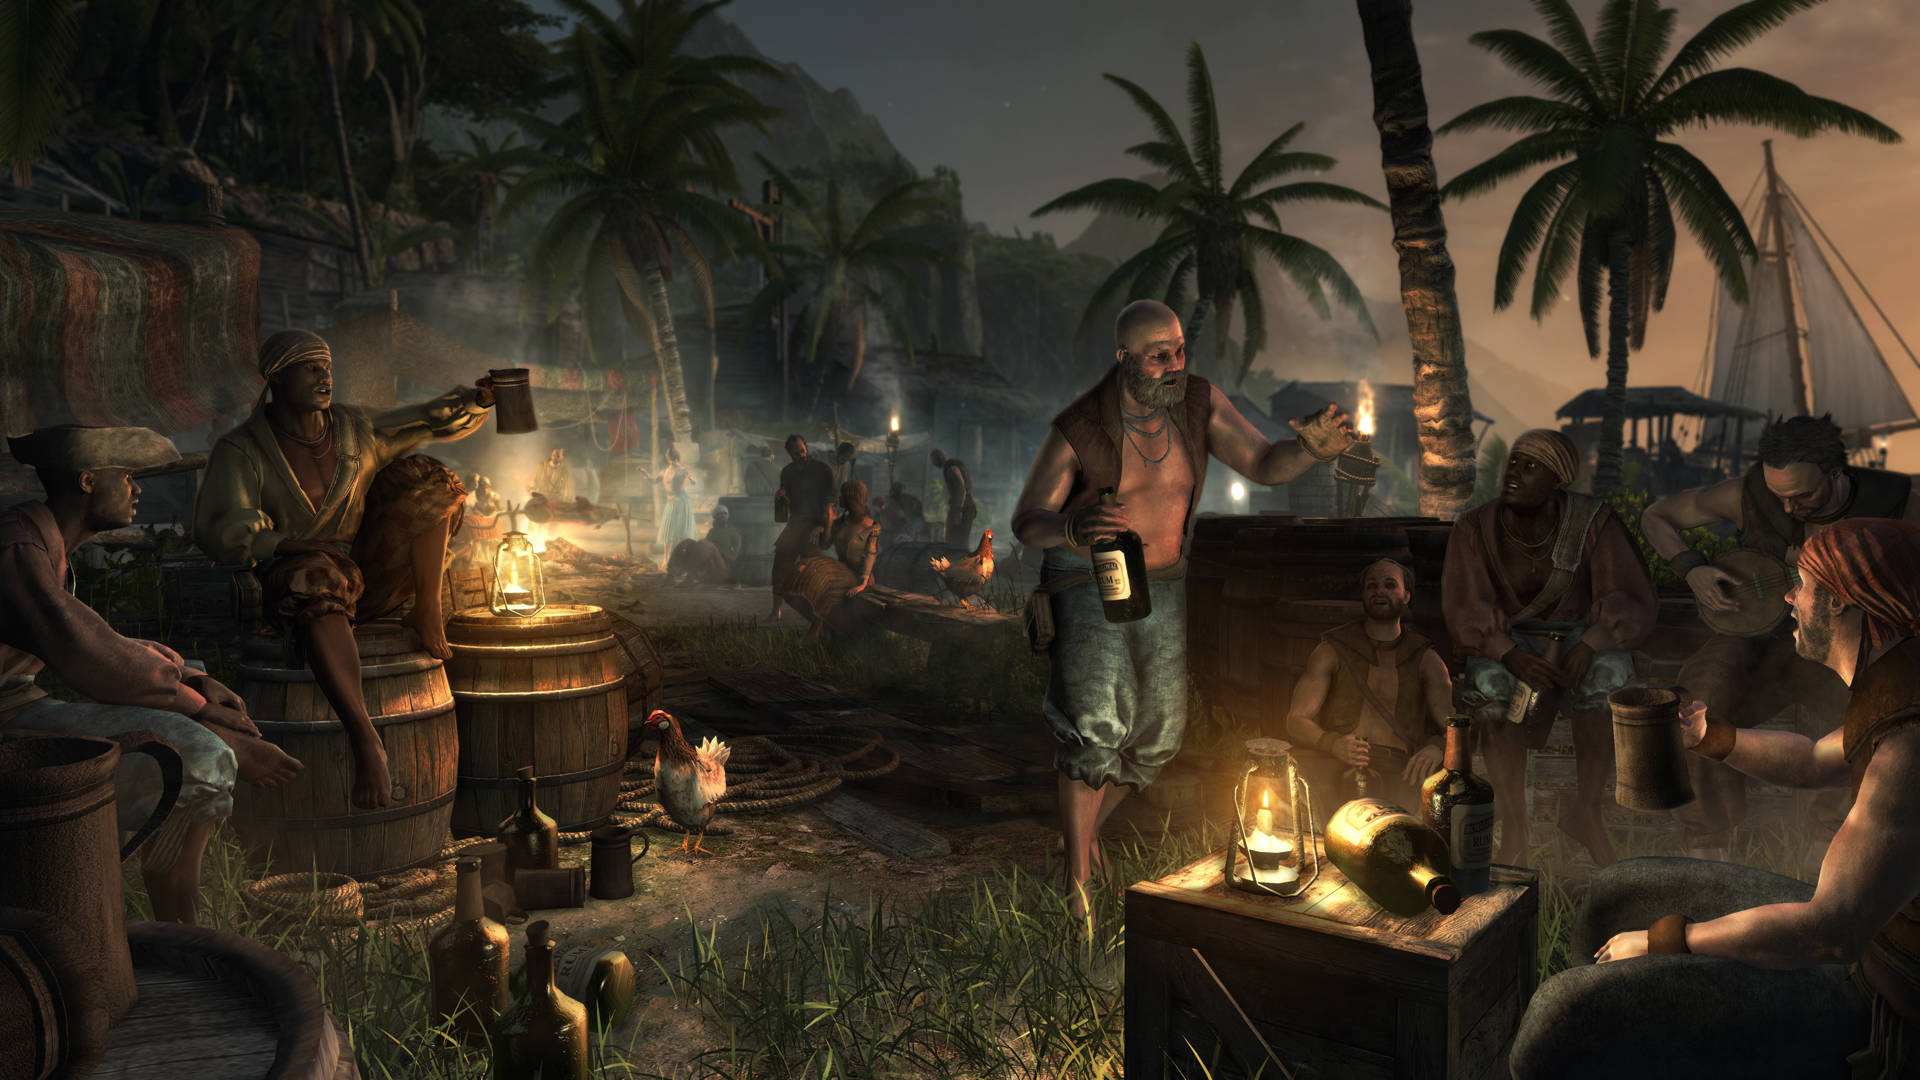 Pirate Adventures Await In Assassin's Creed Black Flag